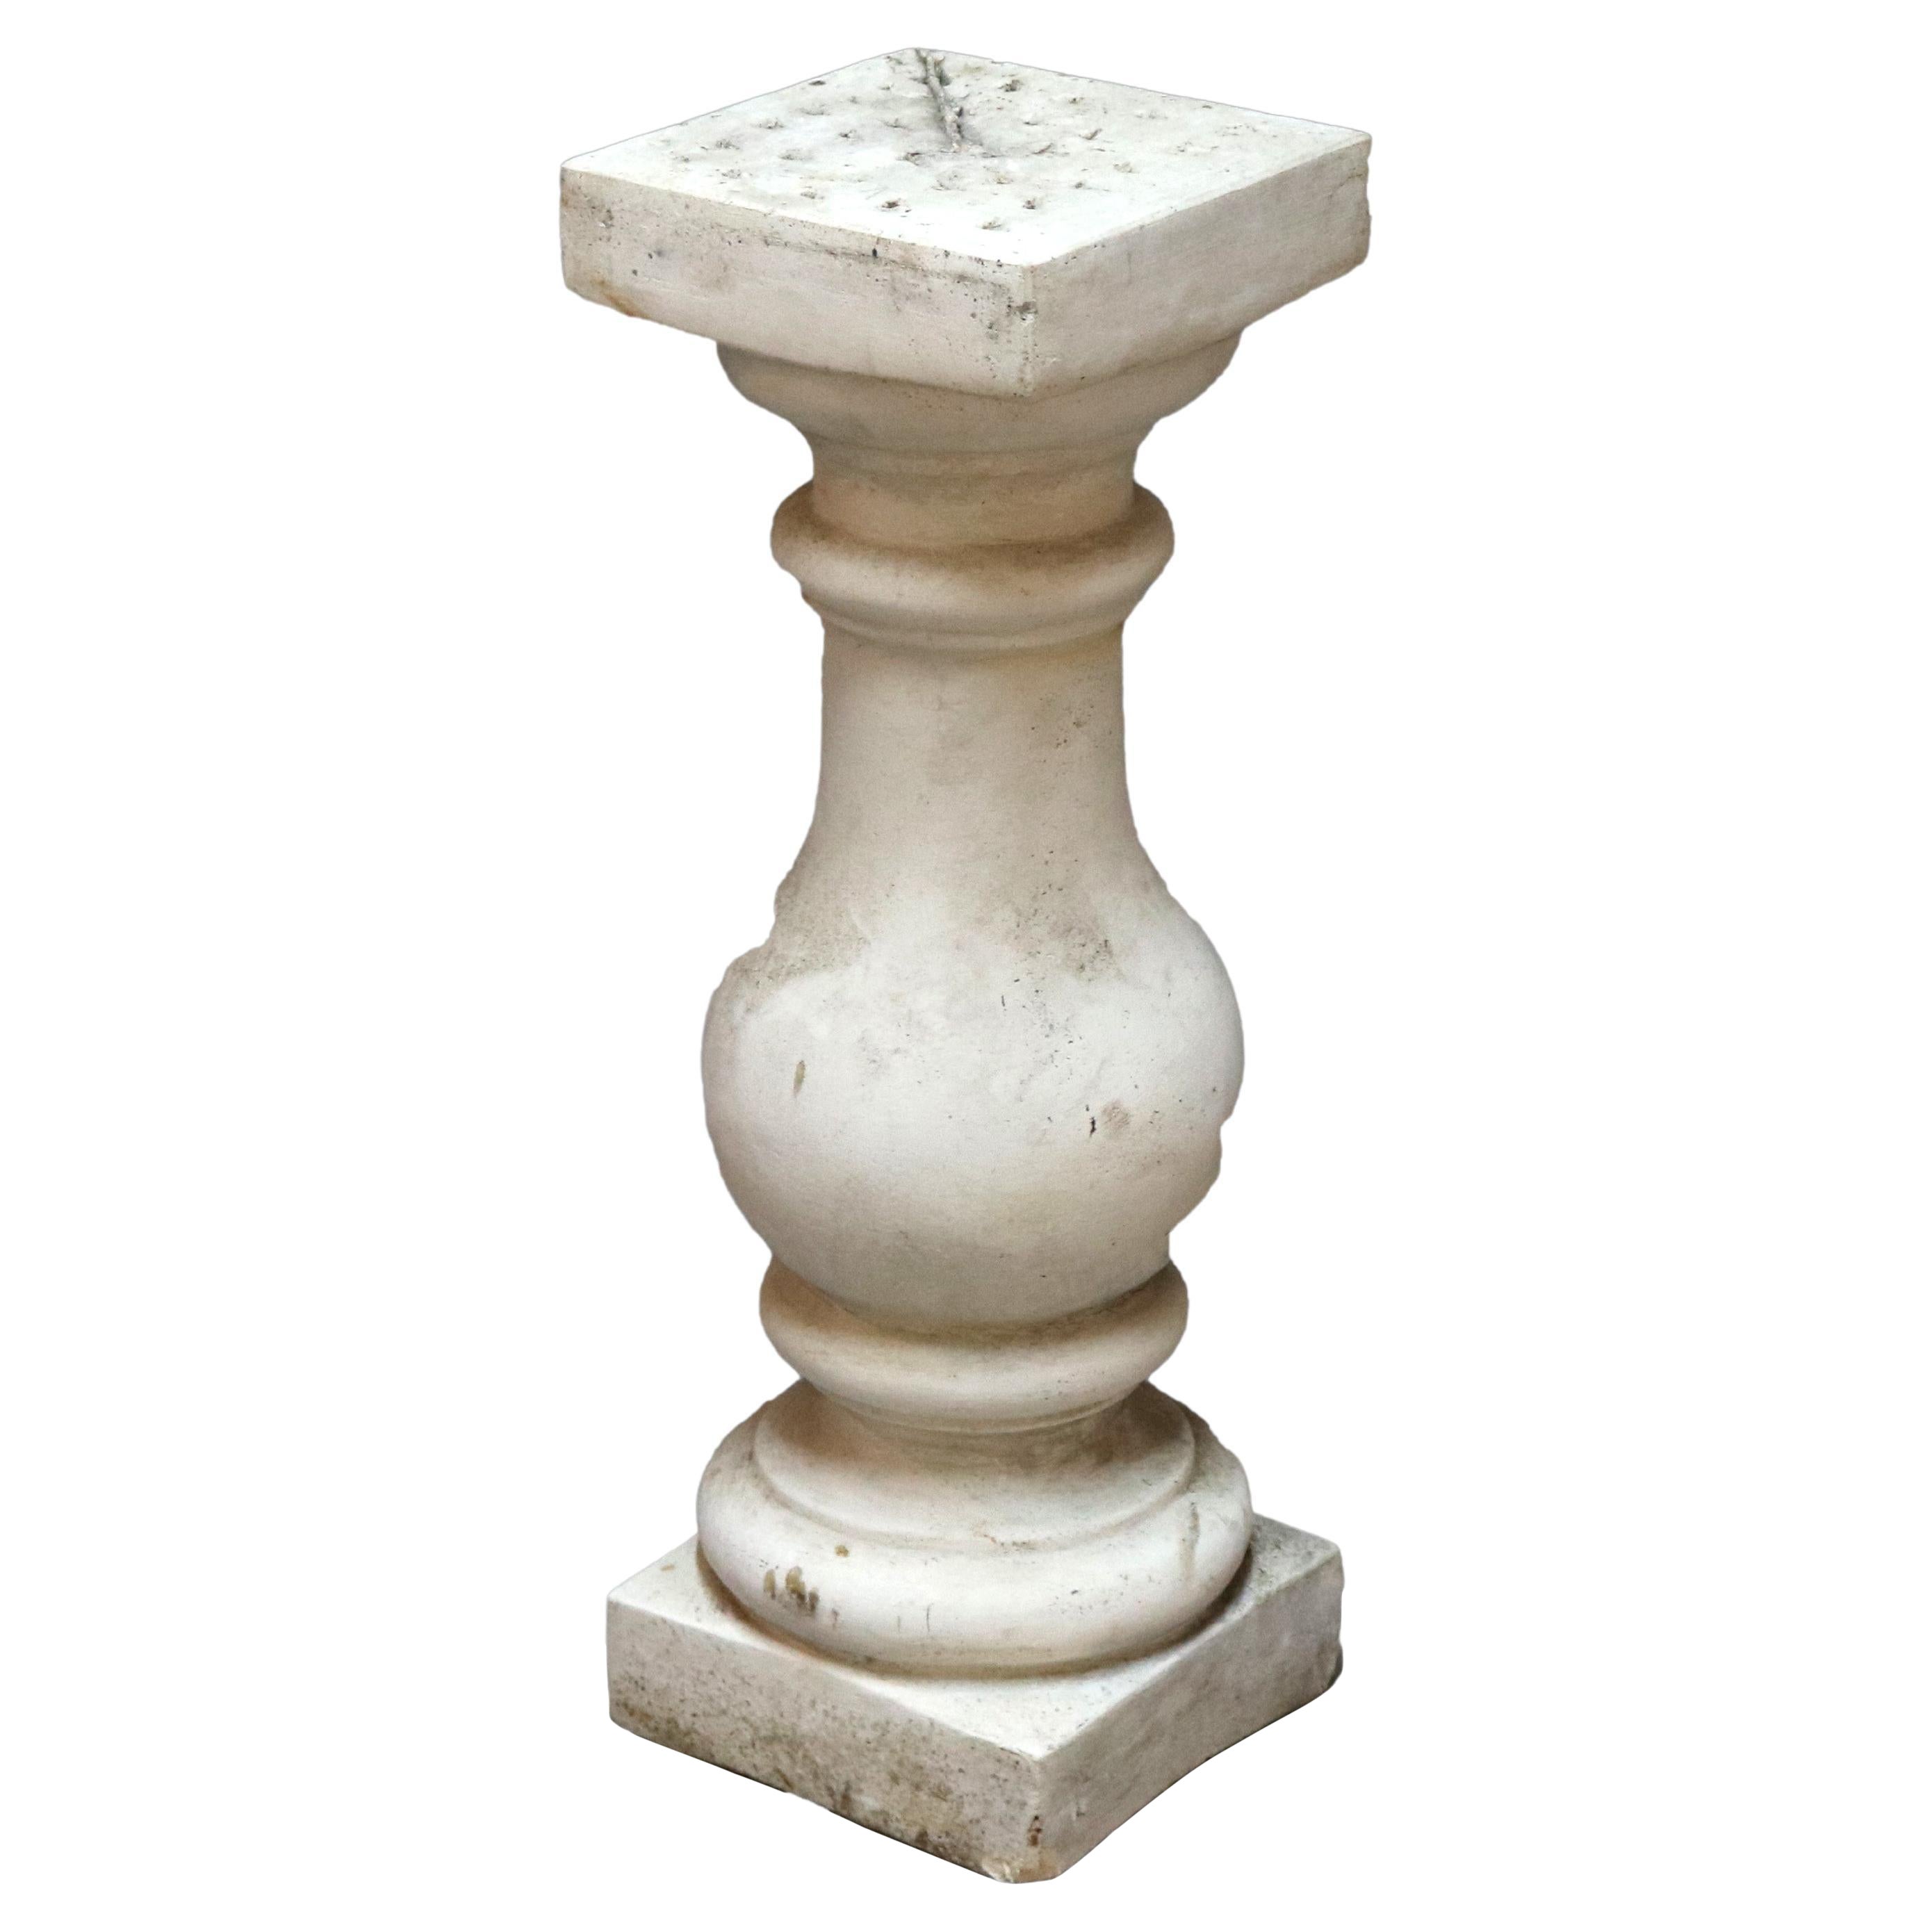 Classical Cast Hard Stone Balustrade Sculpture or Plant Display Pedestal 20th C